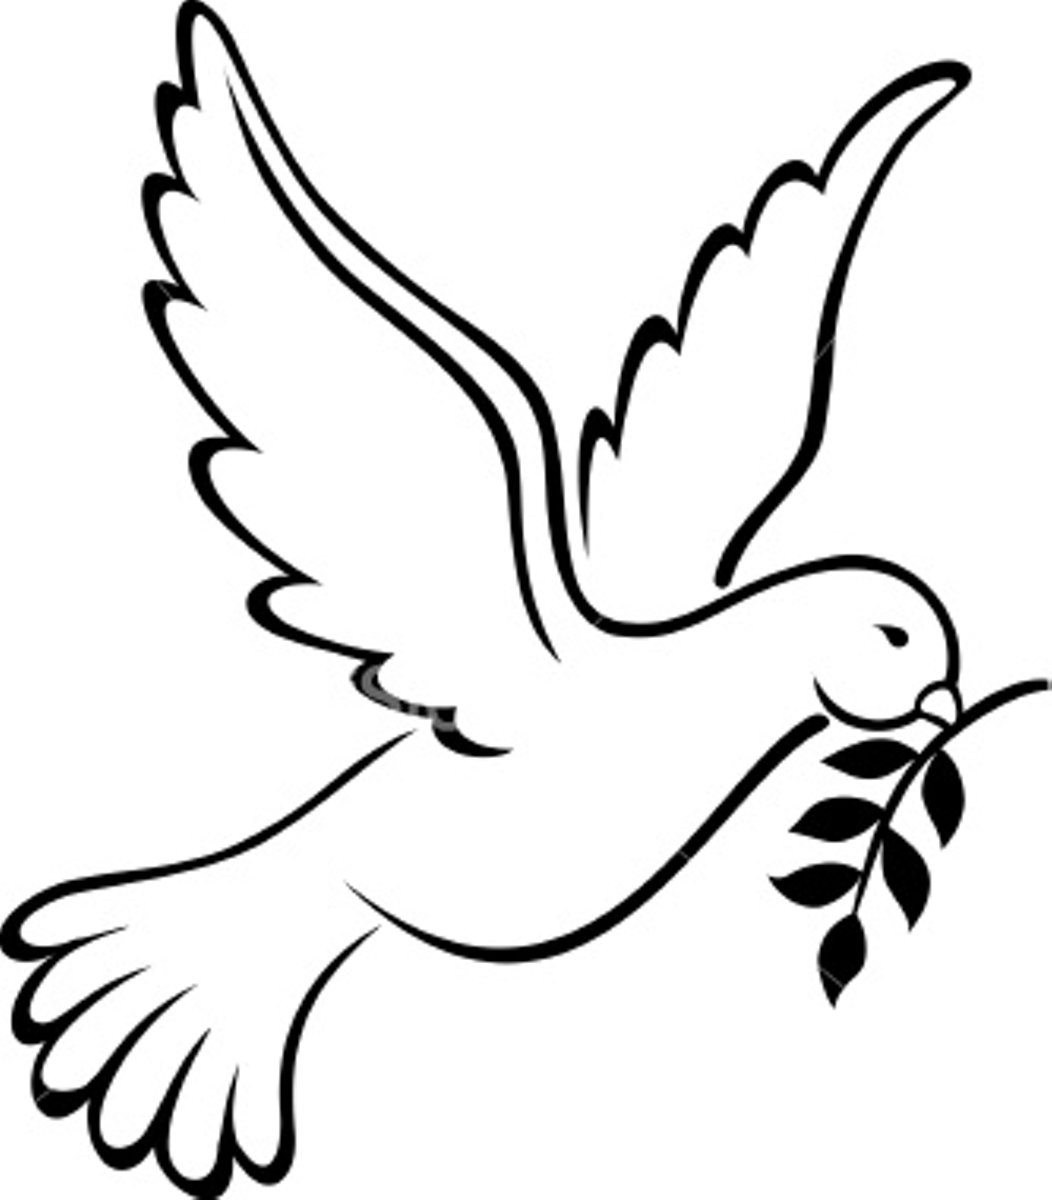 Dove olive branch icon clipart png 